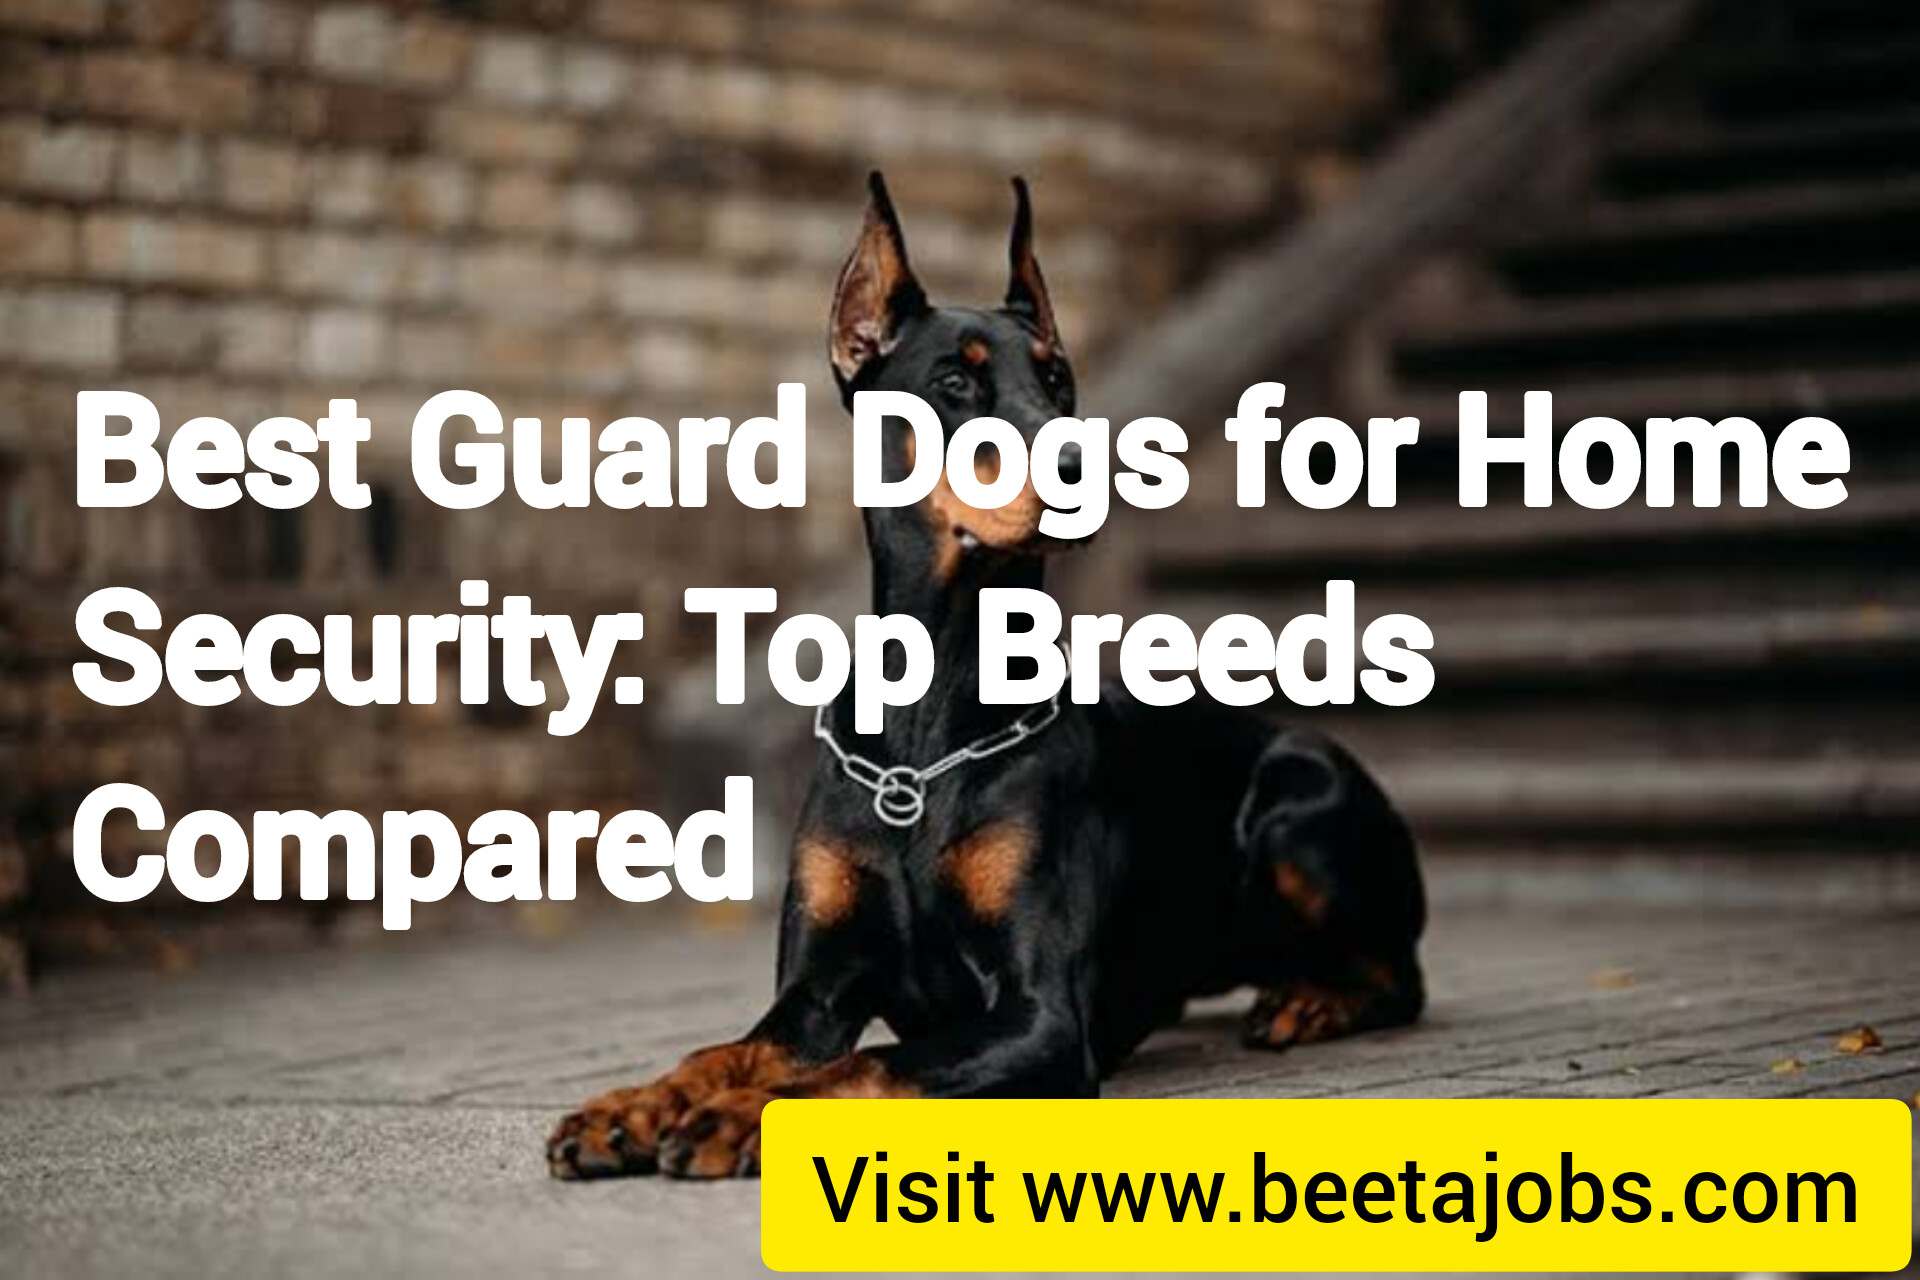 Best Guard Dogs for Home Security: Top Breeds Compared